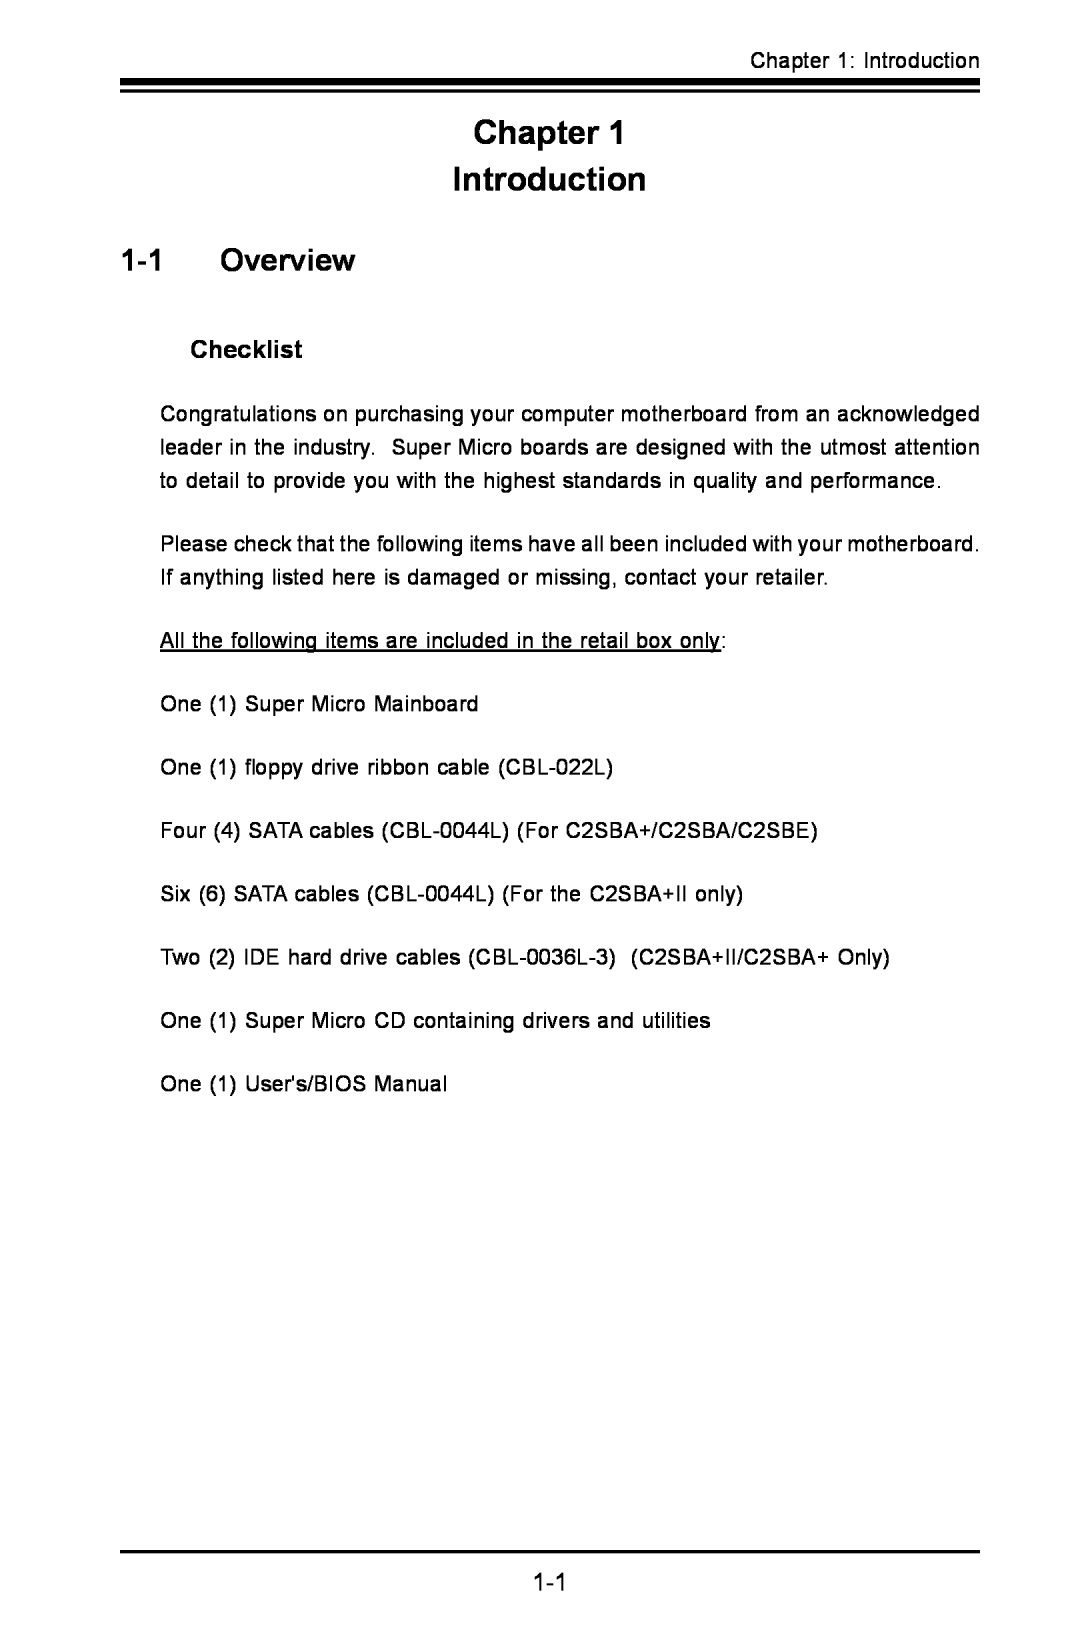 SUPER MICRO Computer C2SBA+II, C2SBE user manual Chapter Introduction, Overview, Checklist 